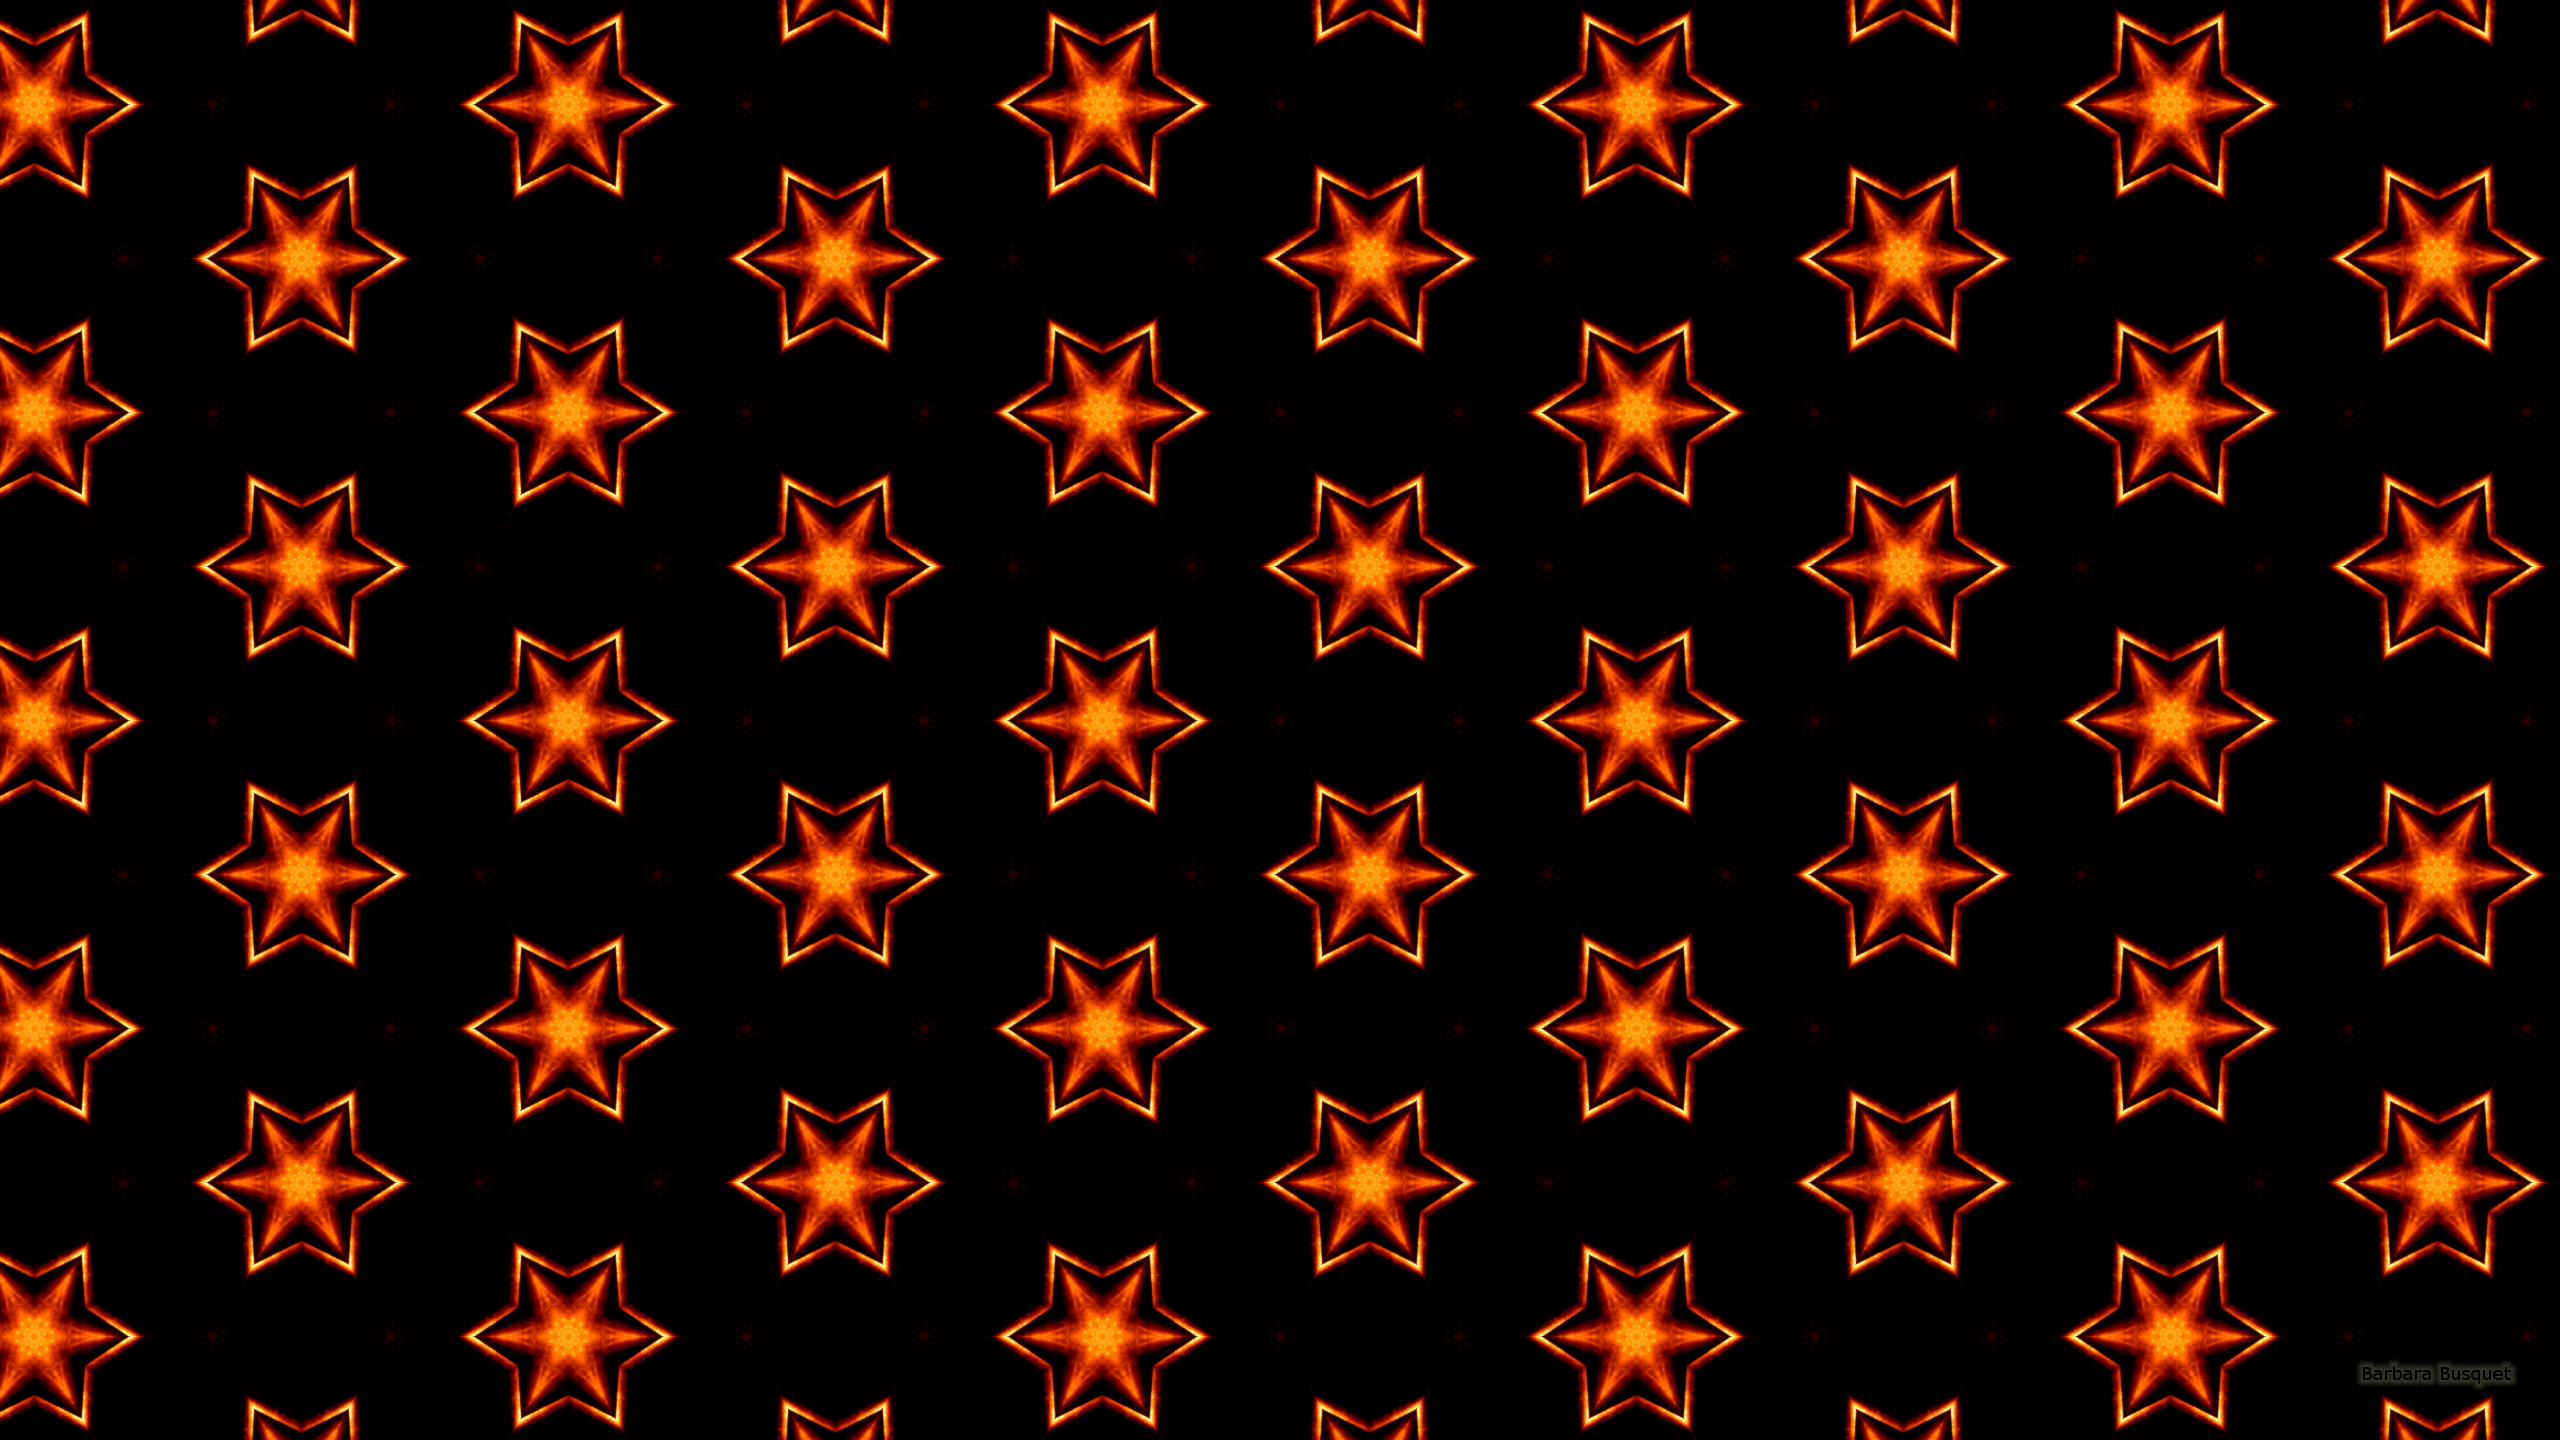 Dark pattern wallpaper with stars made of fire Each star has a